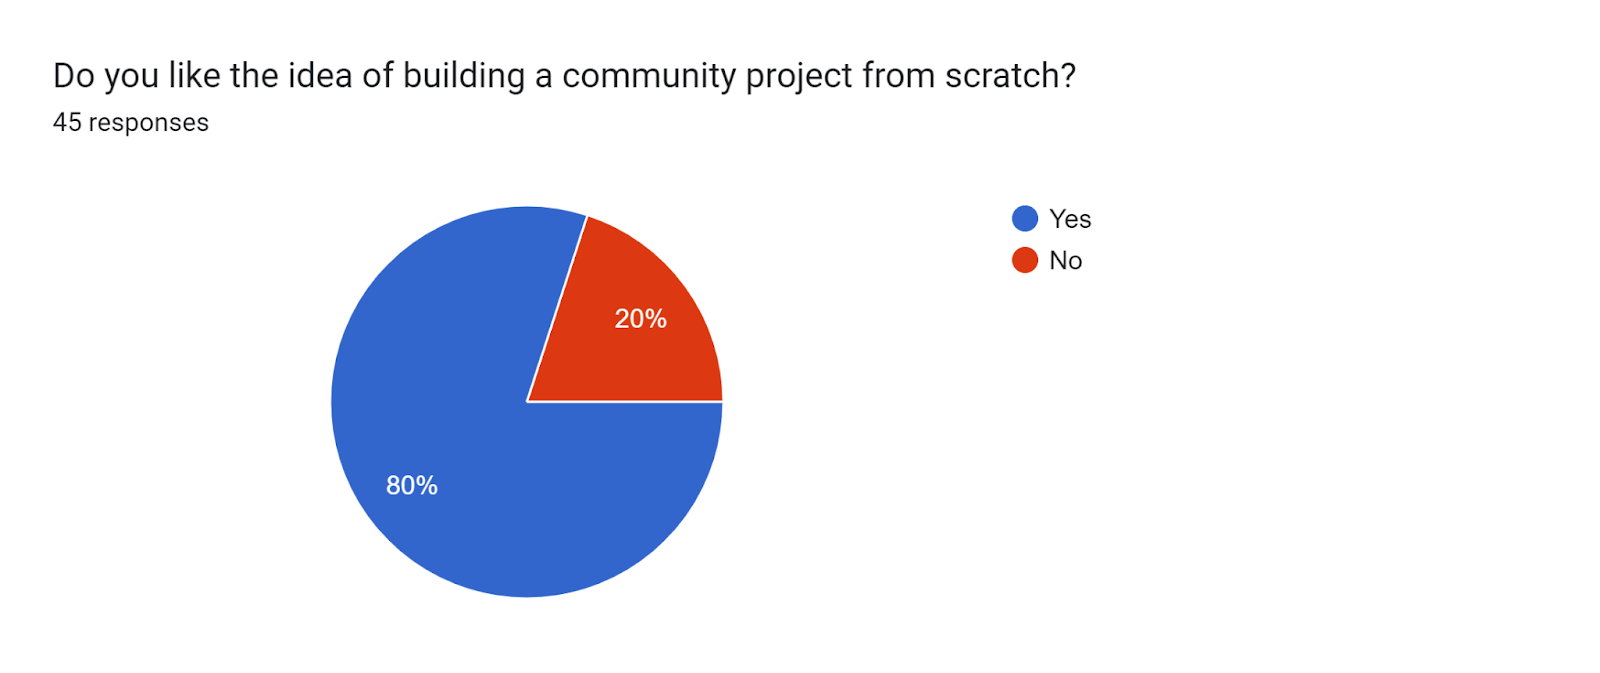 Forms response chart. Question title: Do you like the idea of building a community project from scratch?
. Number of responses: 45 responses.